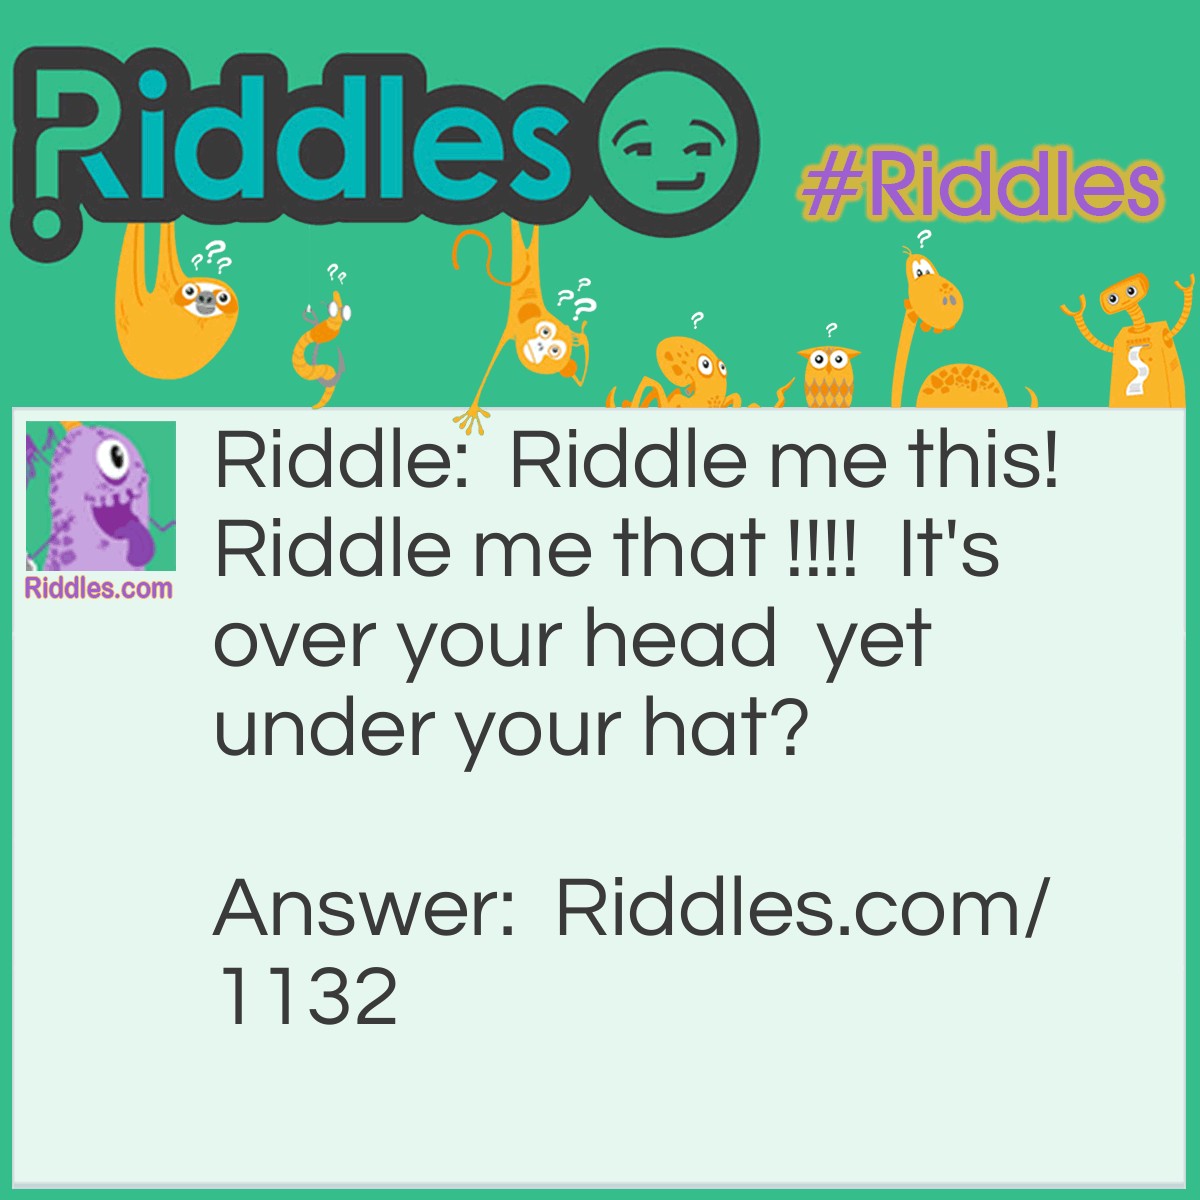 Riddle: Riddle me this.  Riddle me that.   It's over your head,   yet under your hat. What is it? Answer: Your hair.